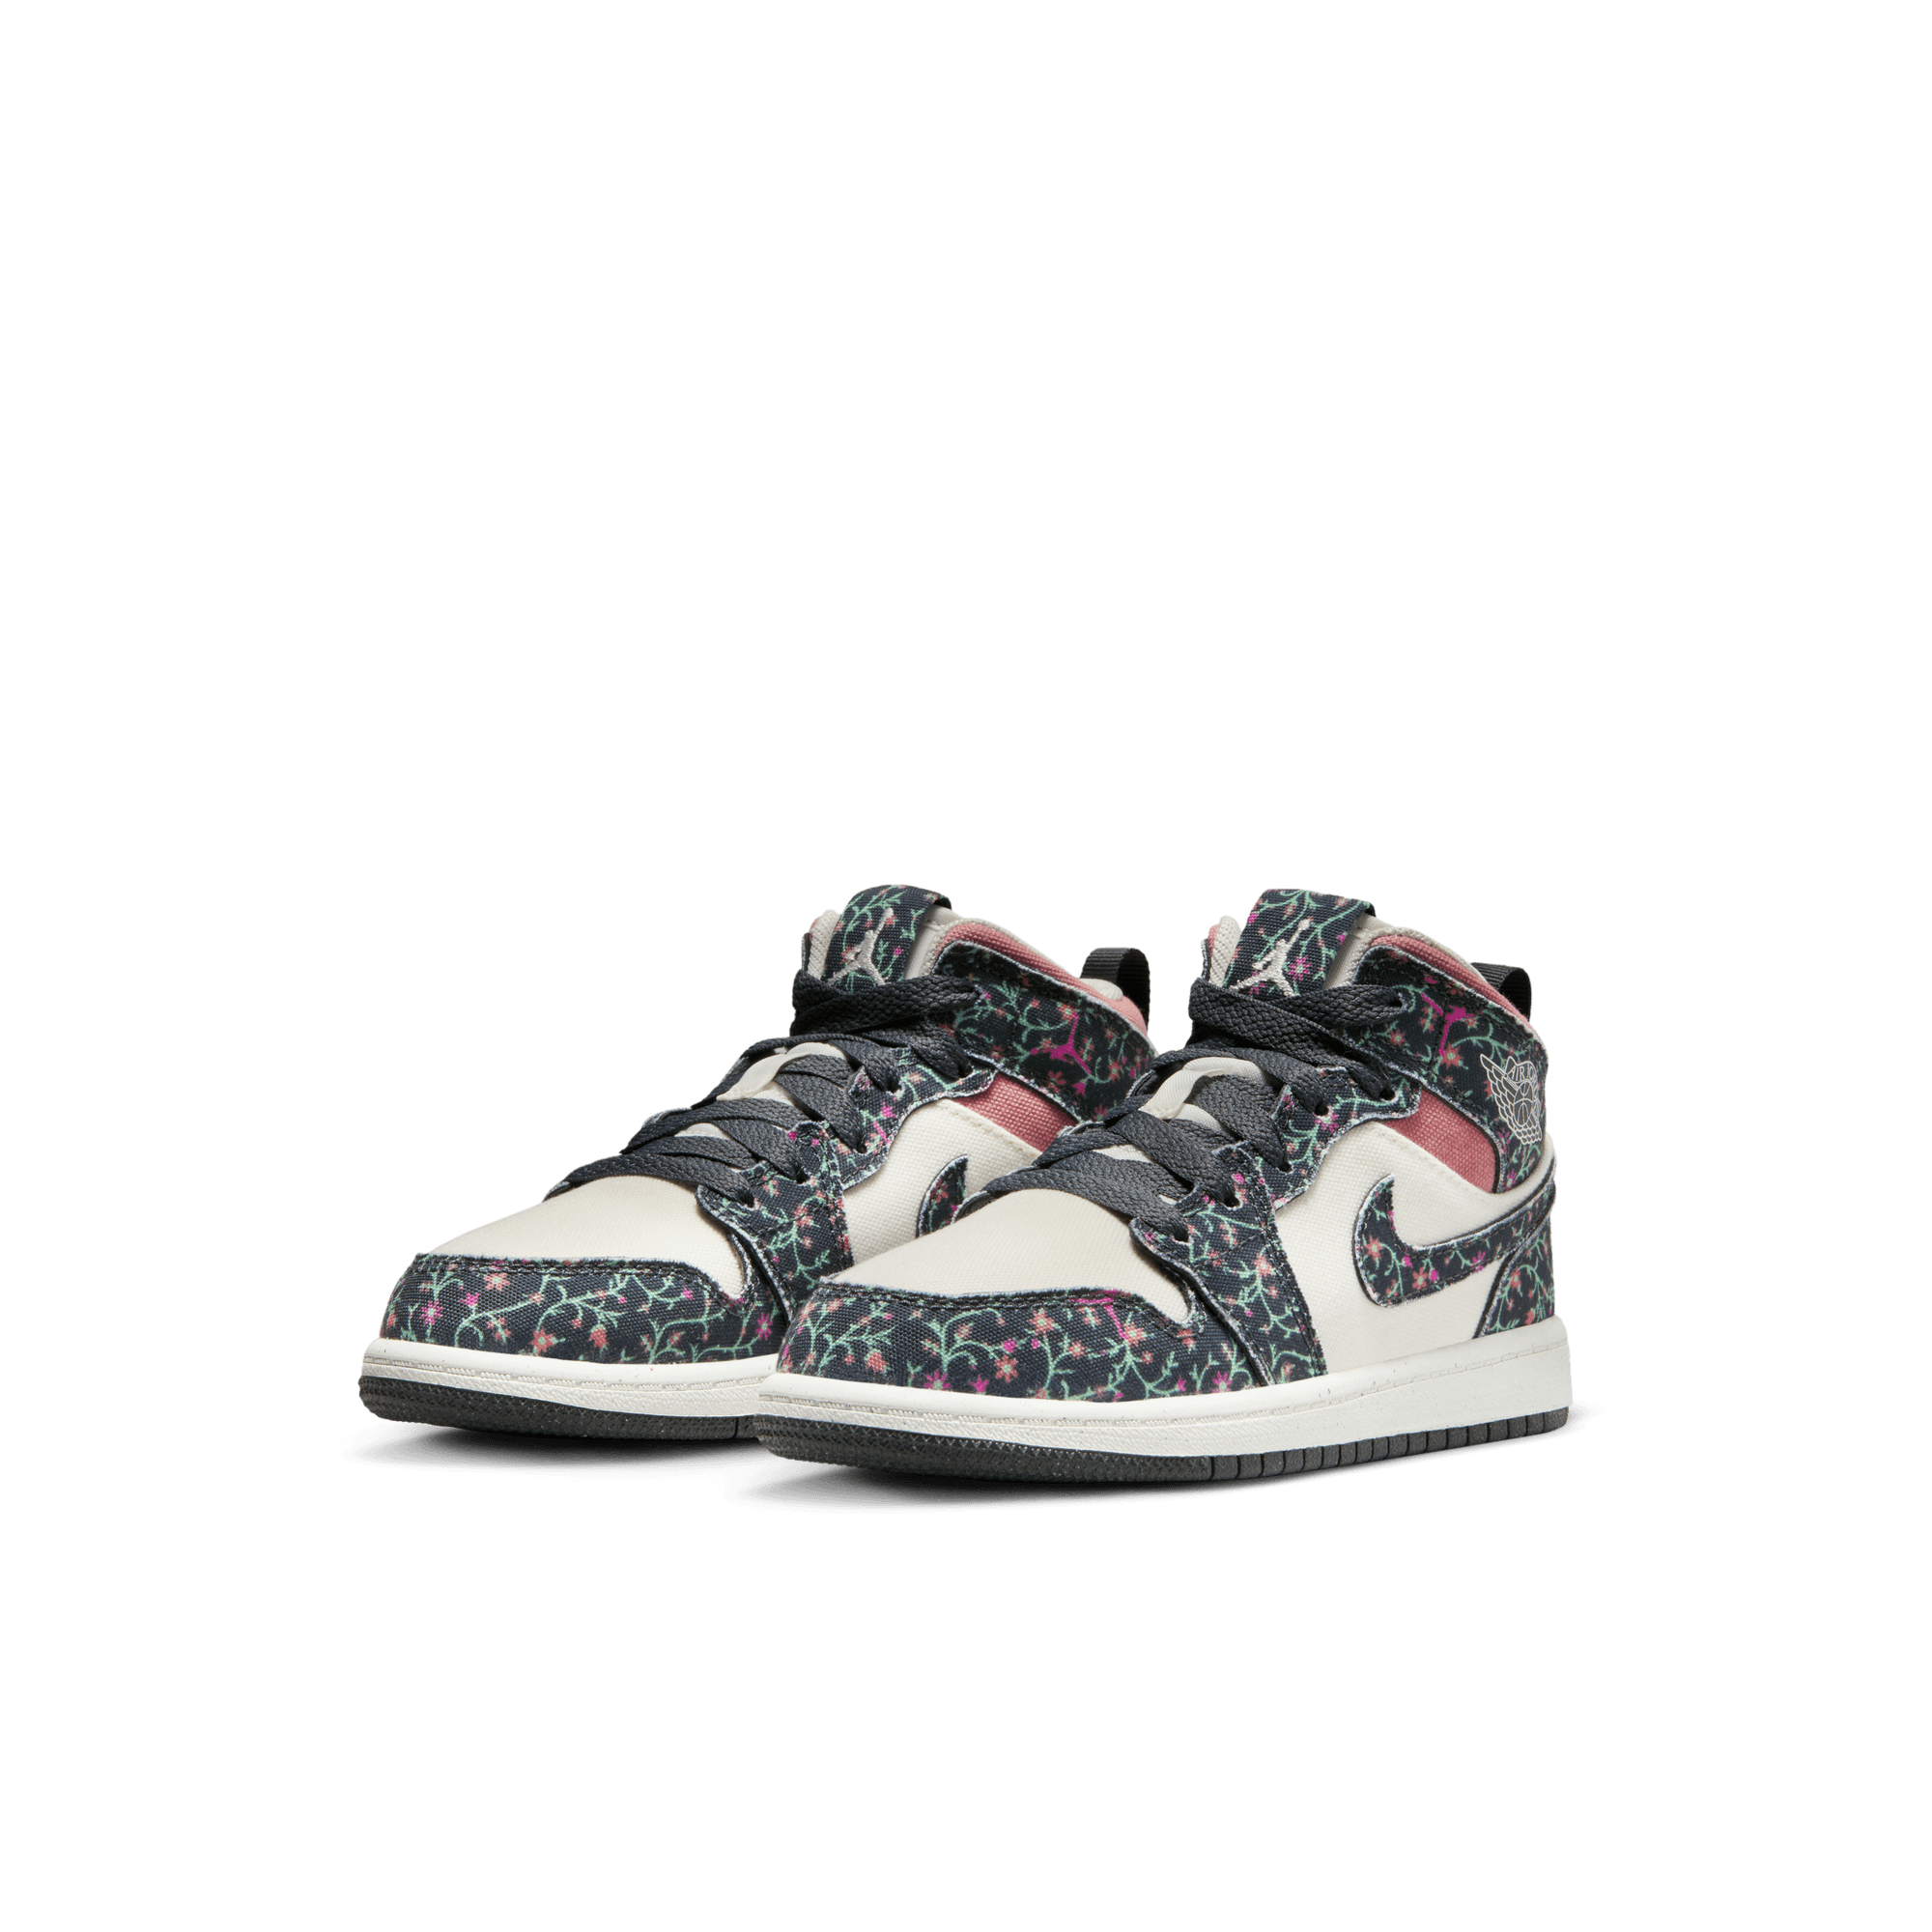 AIR JORDAN 1 MID SE LITTLE KIDS' SHOES ANTHRACITE/ANTHRACITE-SAIL-RED ...